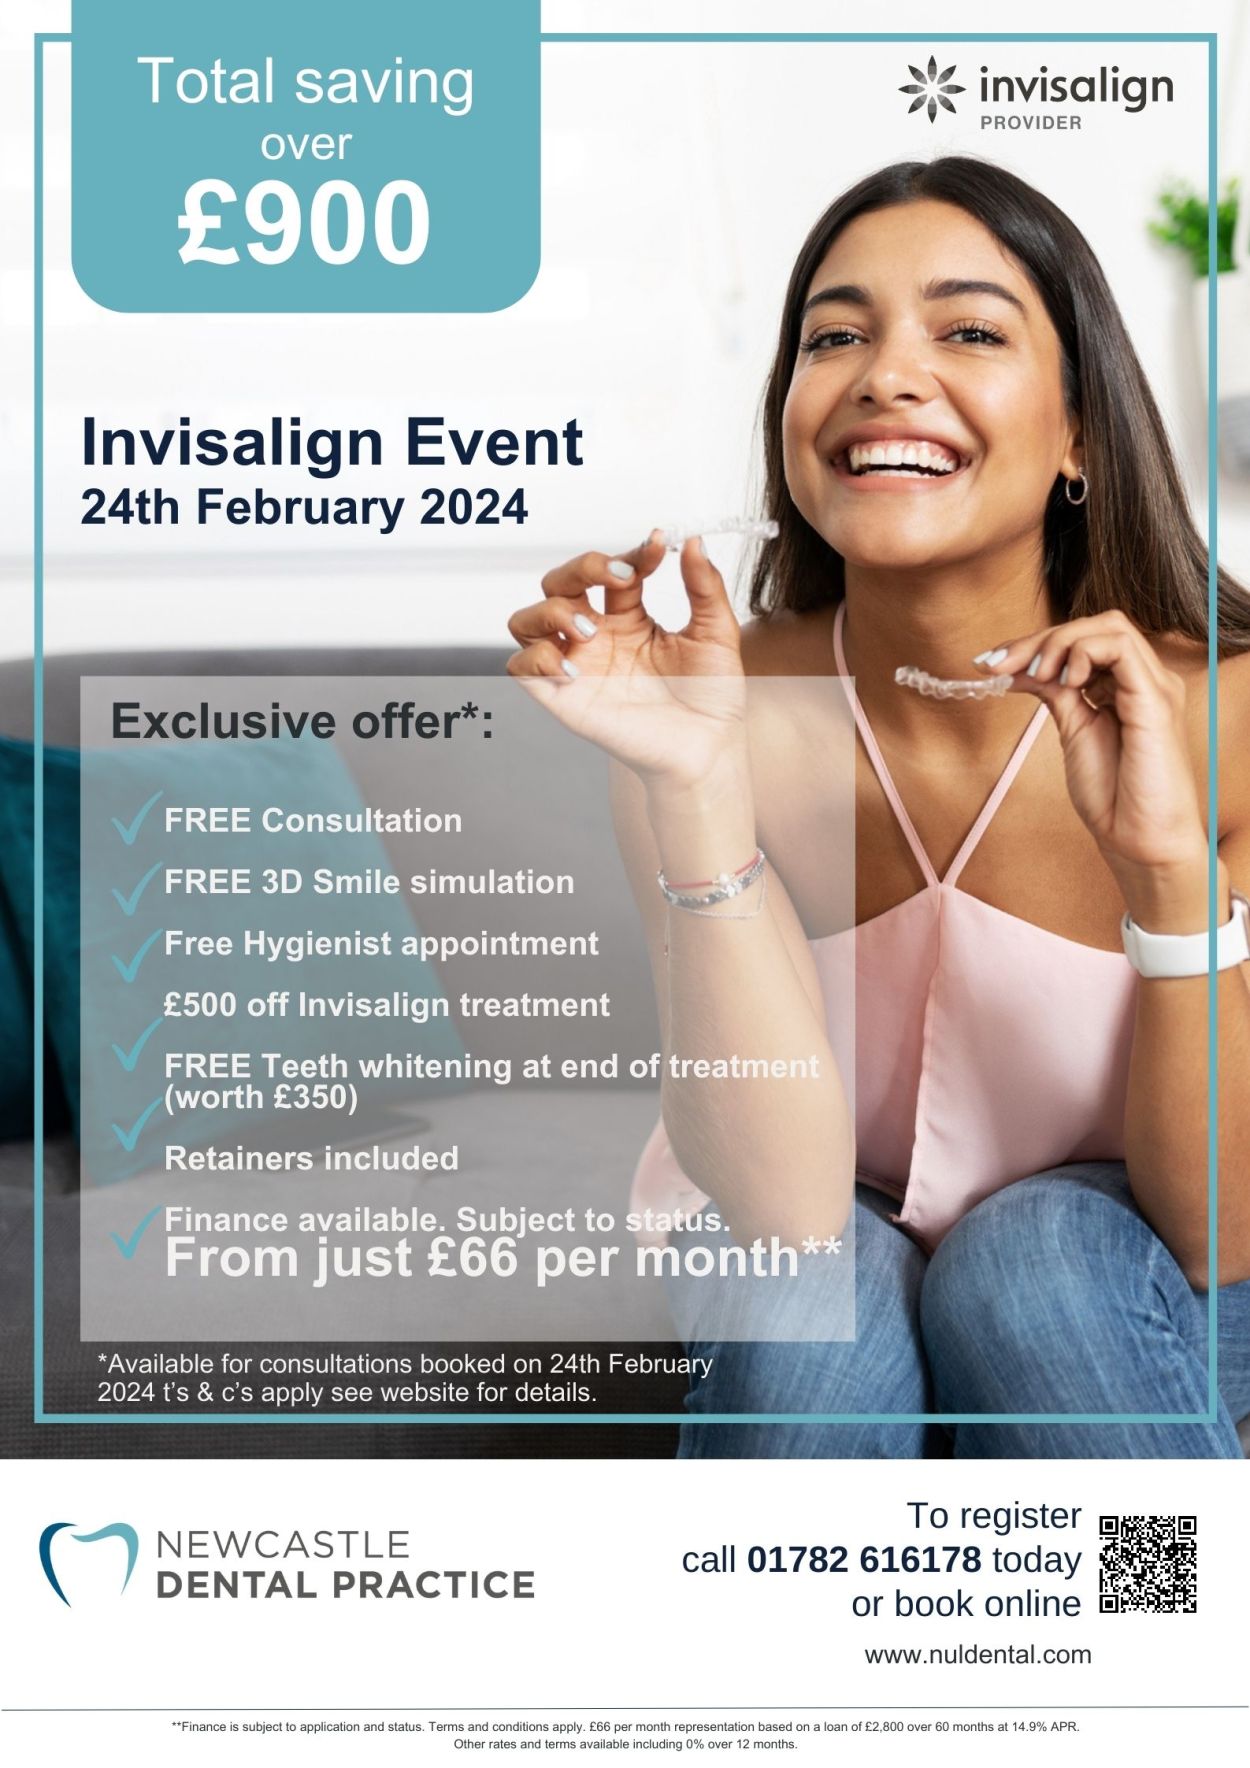 Invisalign save £900 with our latest promotion